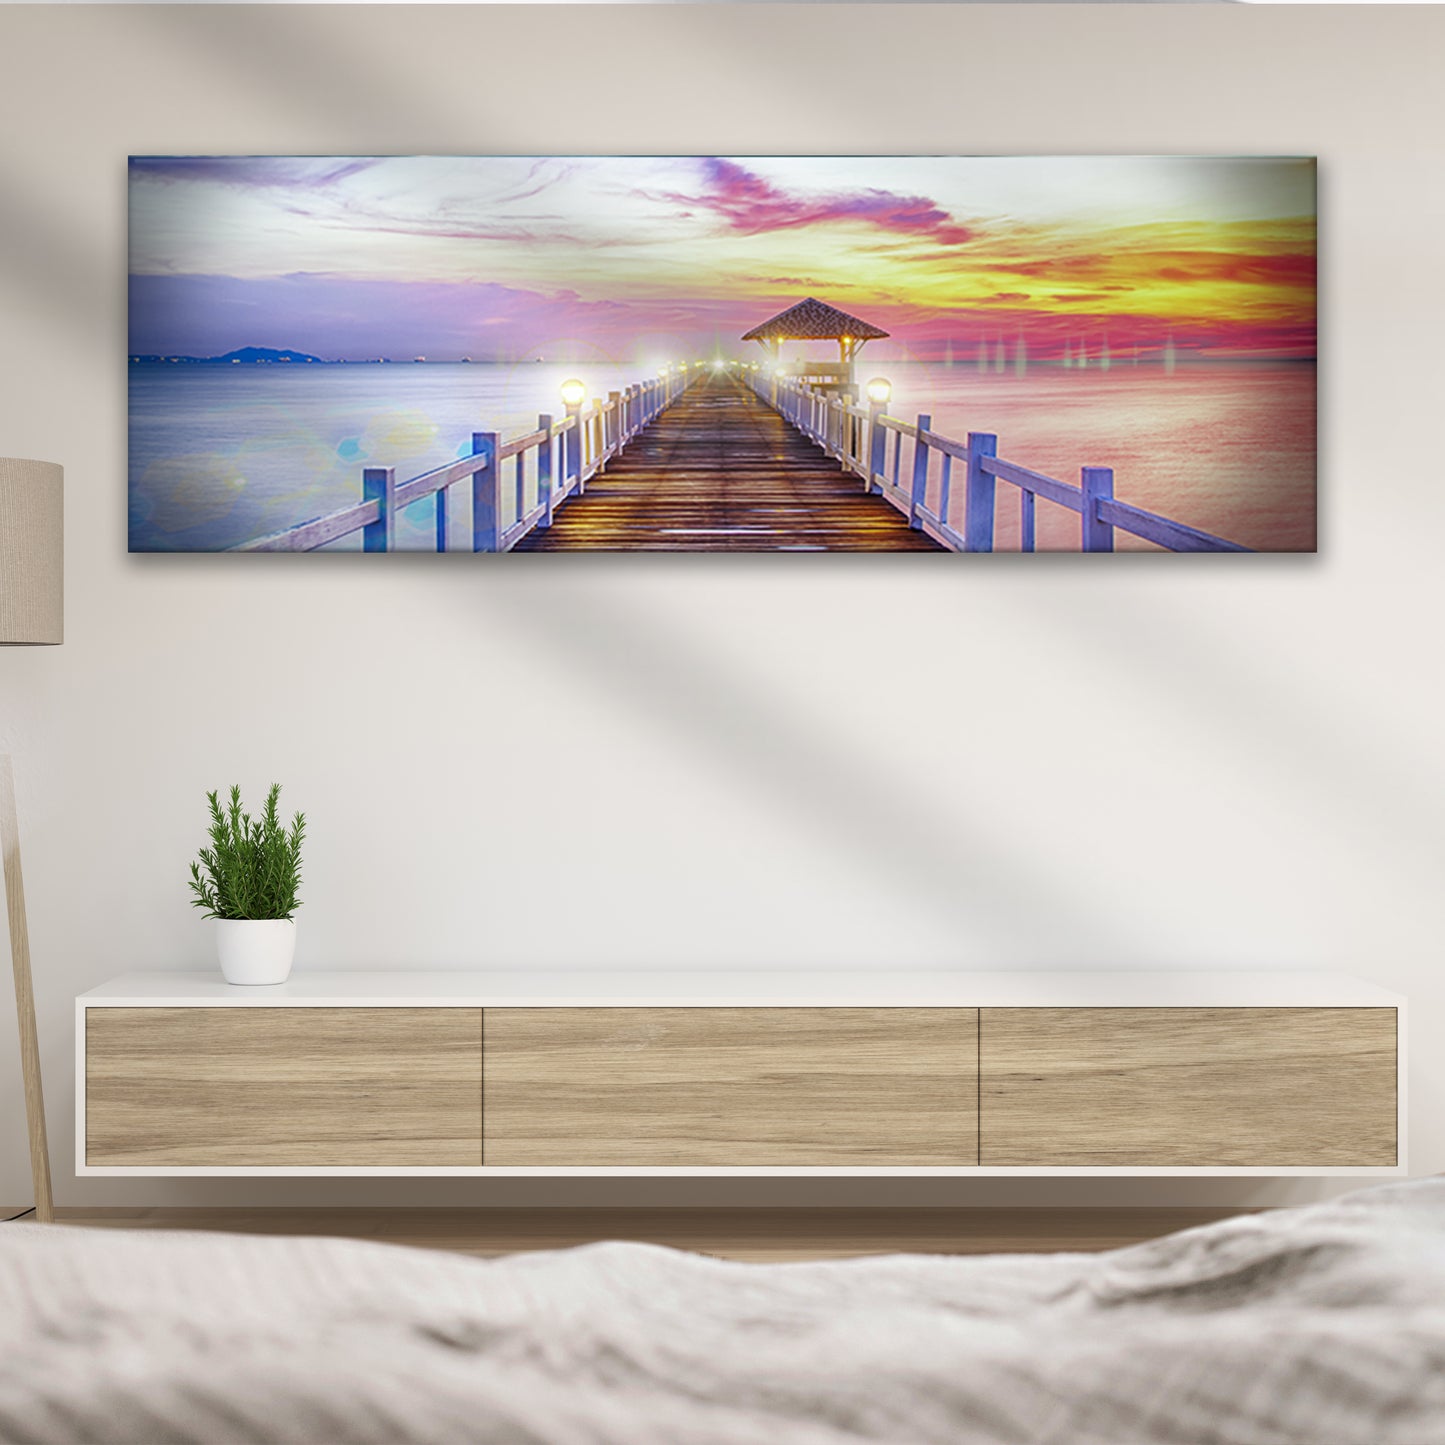 Pastel Skies And Ocean Pier Canvas Wall Art - Image by Tailored Canvases